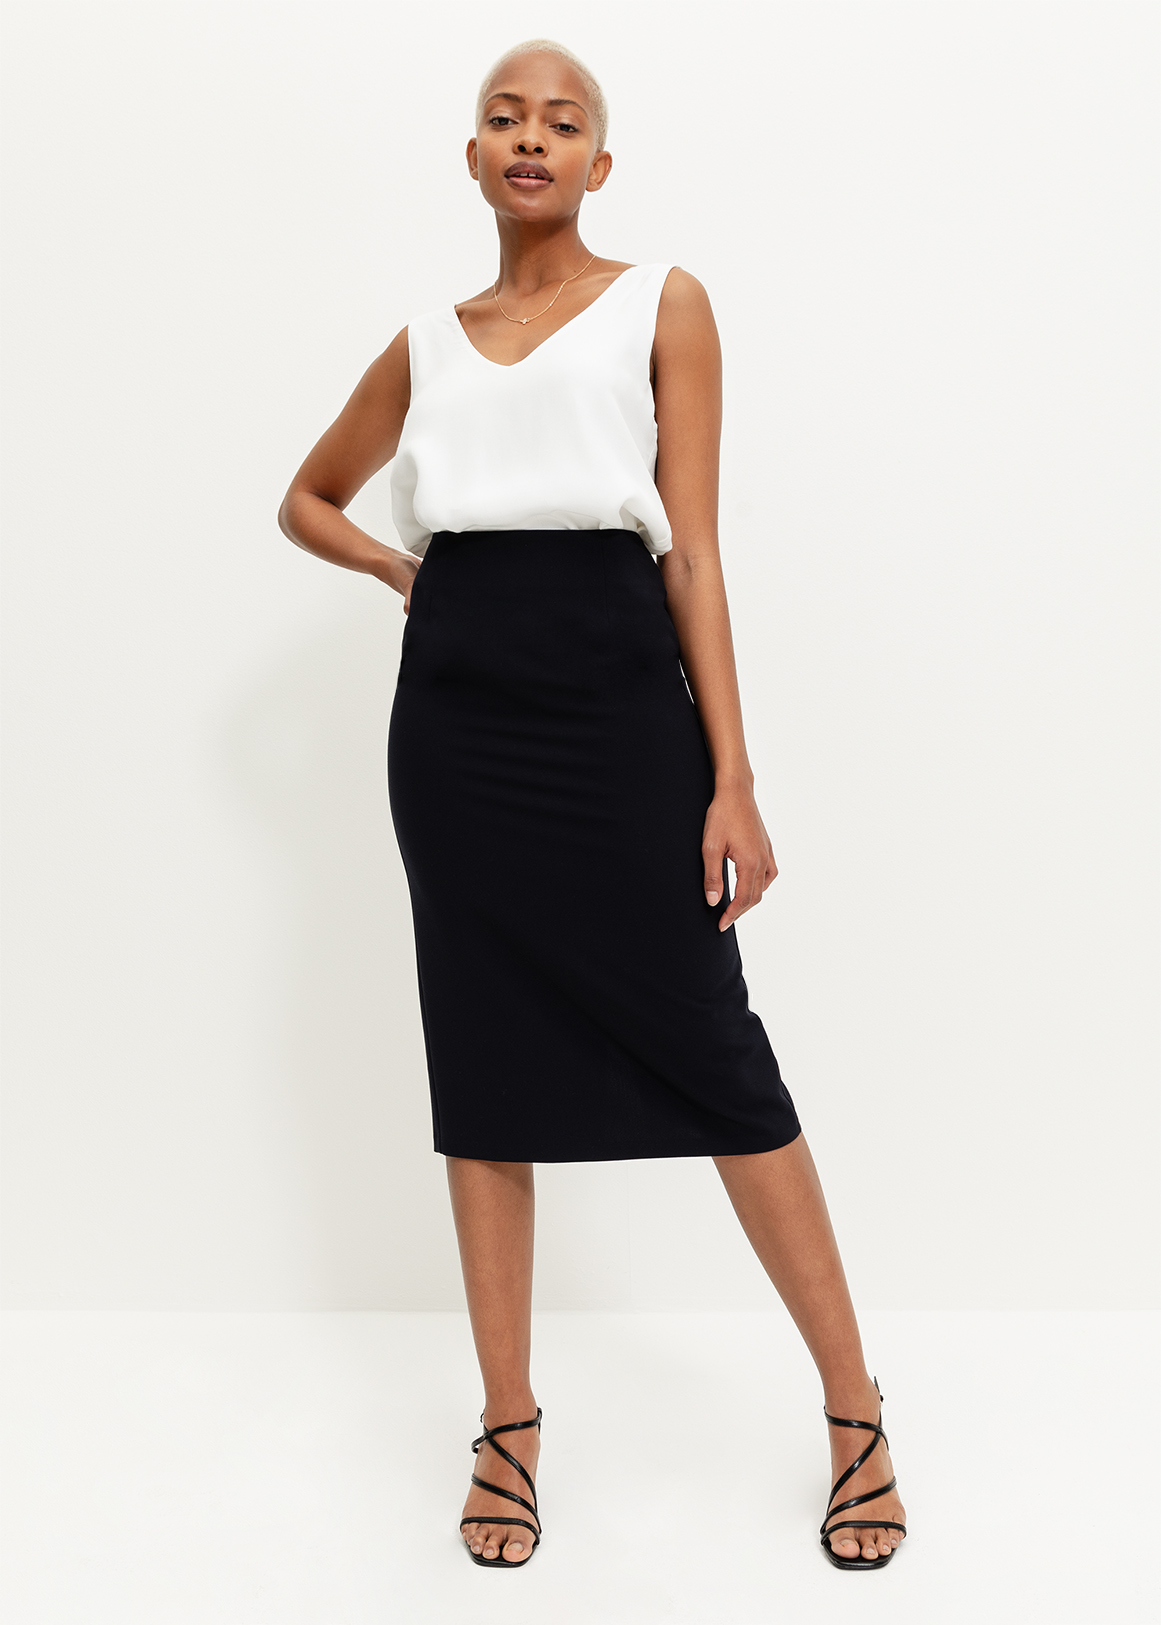 Most Trending And Demanding High waist Pencil Skirts To Wear In